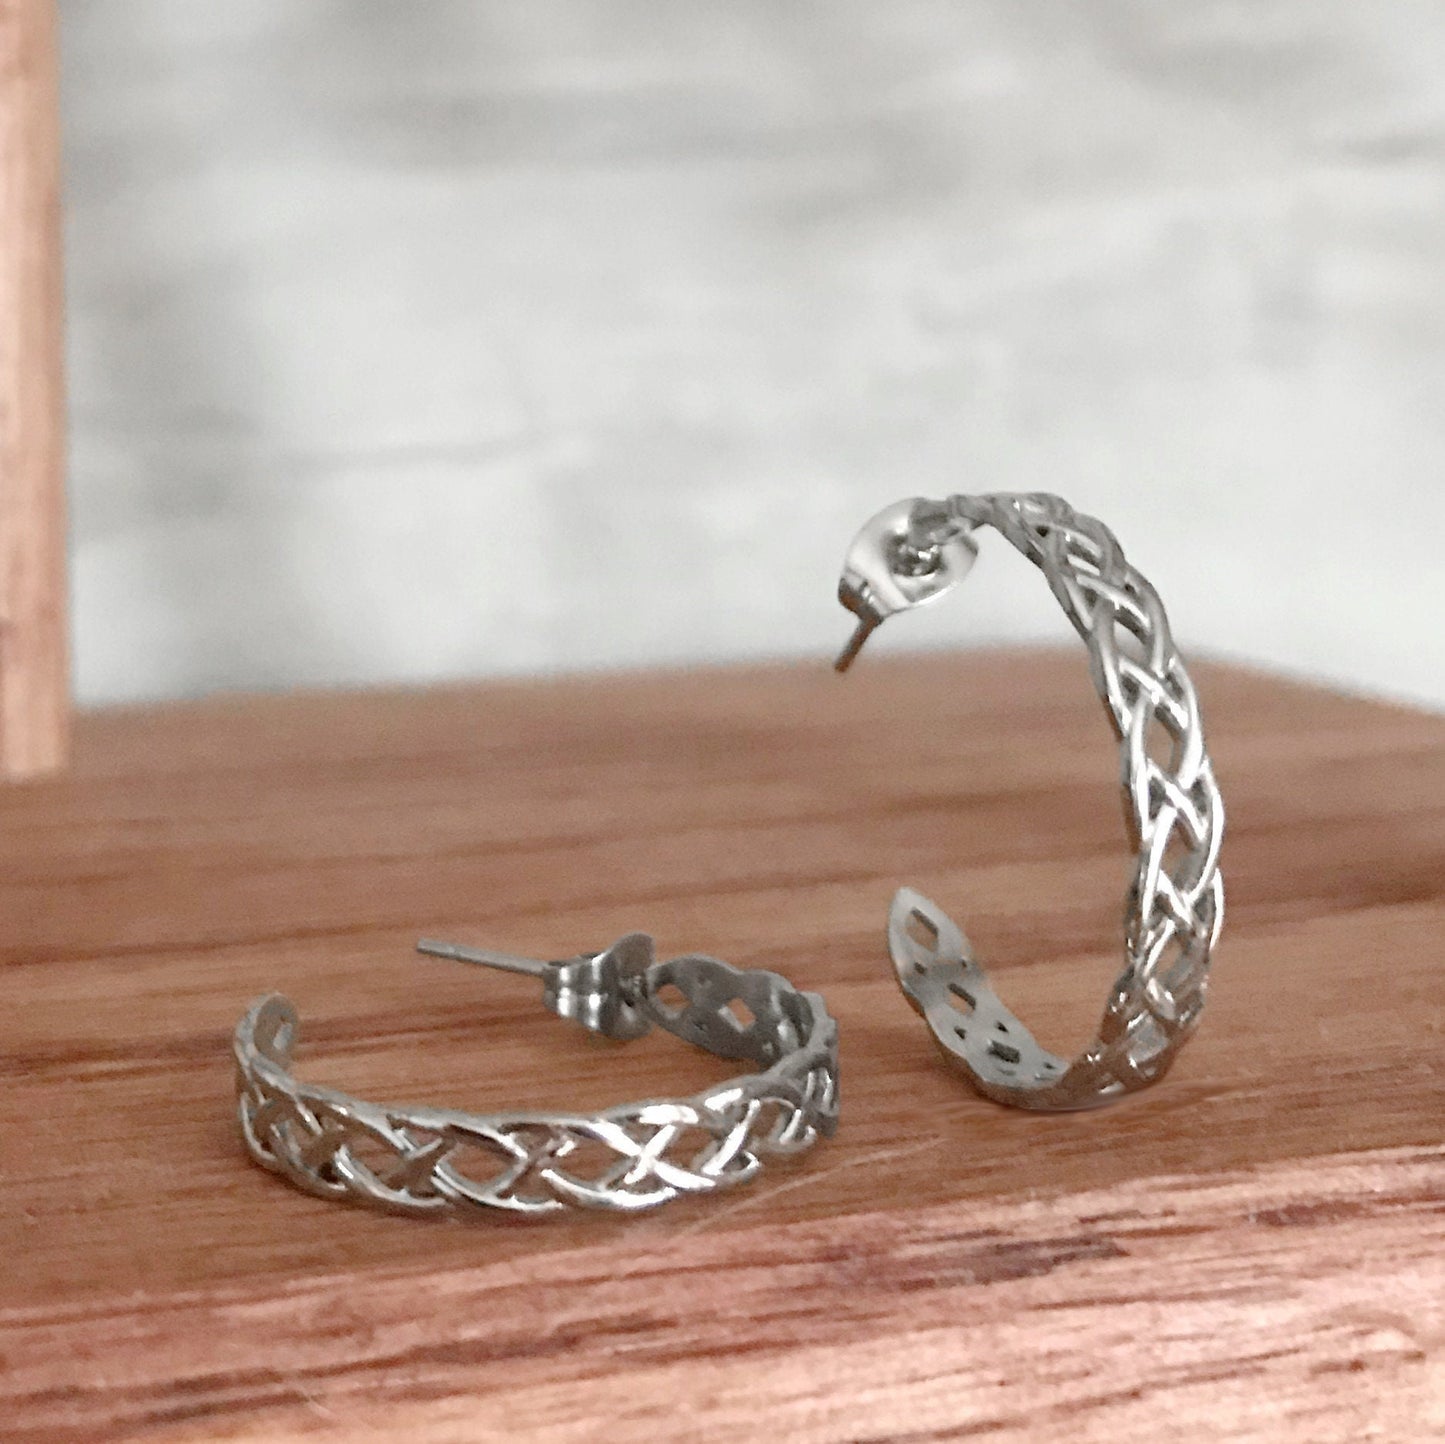 Braided Hoop Earrings, Stainless Steel, Irish Jewelry for Women, Gift Ideas For Sister, Bridesmaid Gift, Medium, Round